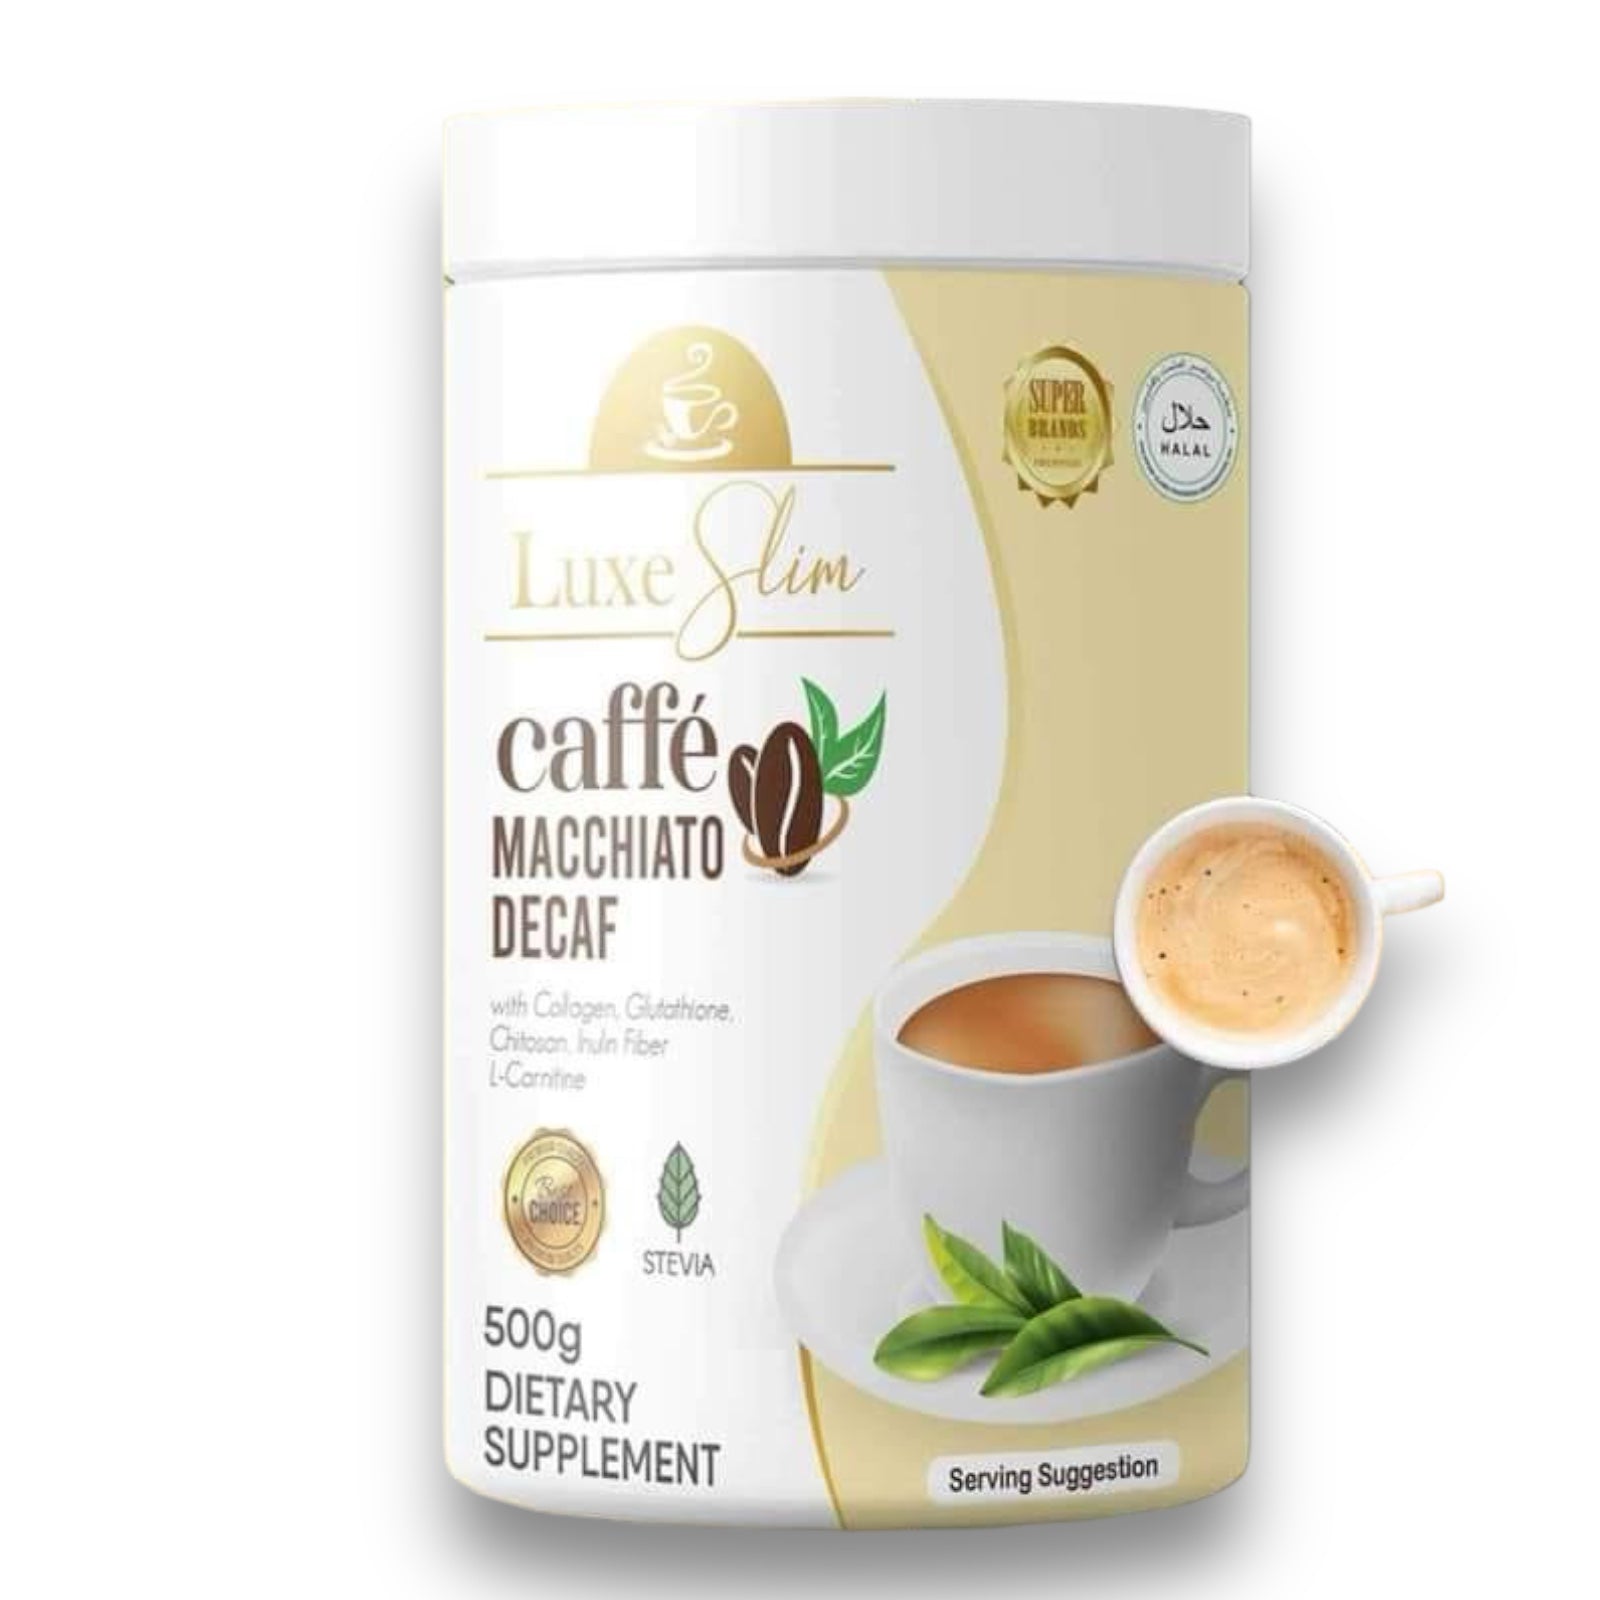 Luxe Slim - Macchiato DECAF - CANISTER - DECAF 500mg